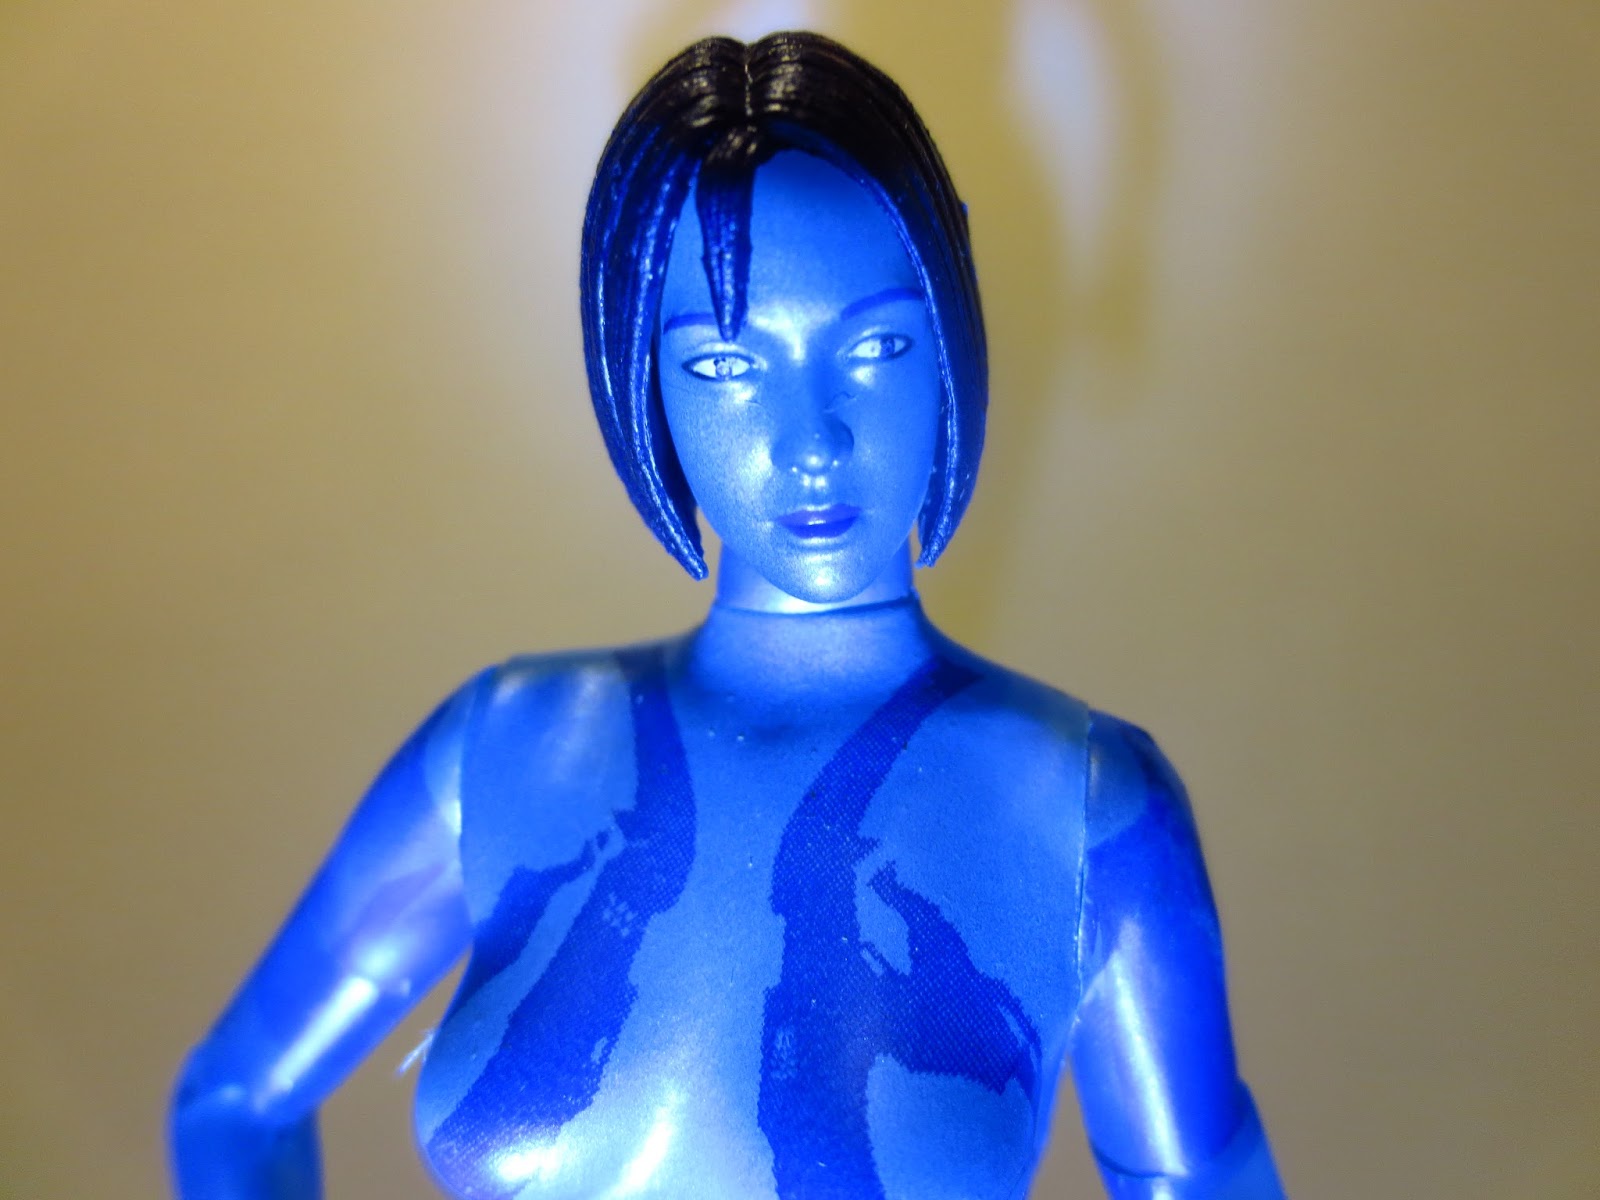 Action Figure Review: Cortana from Halo 4 by McFarlane Toys.